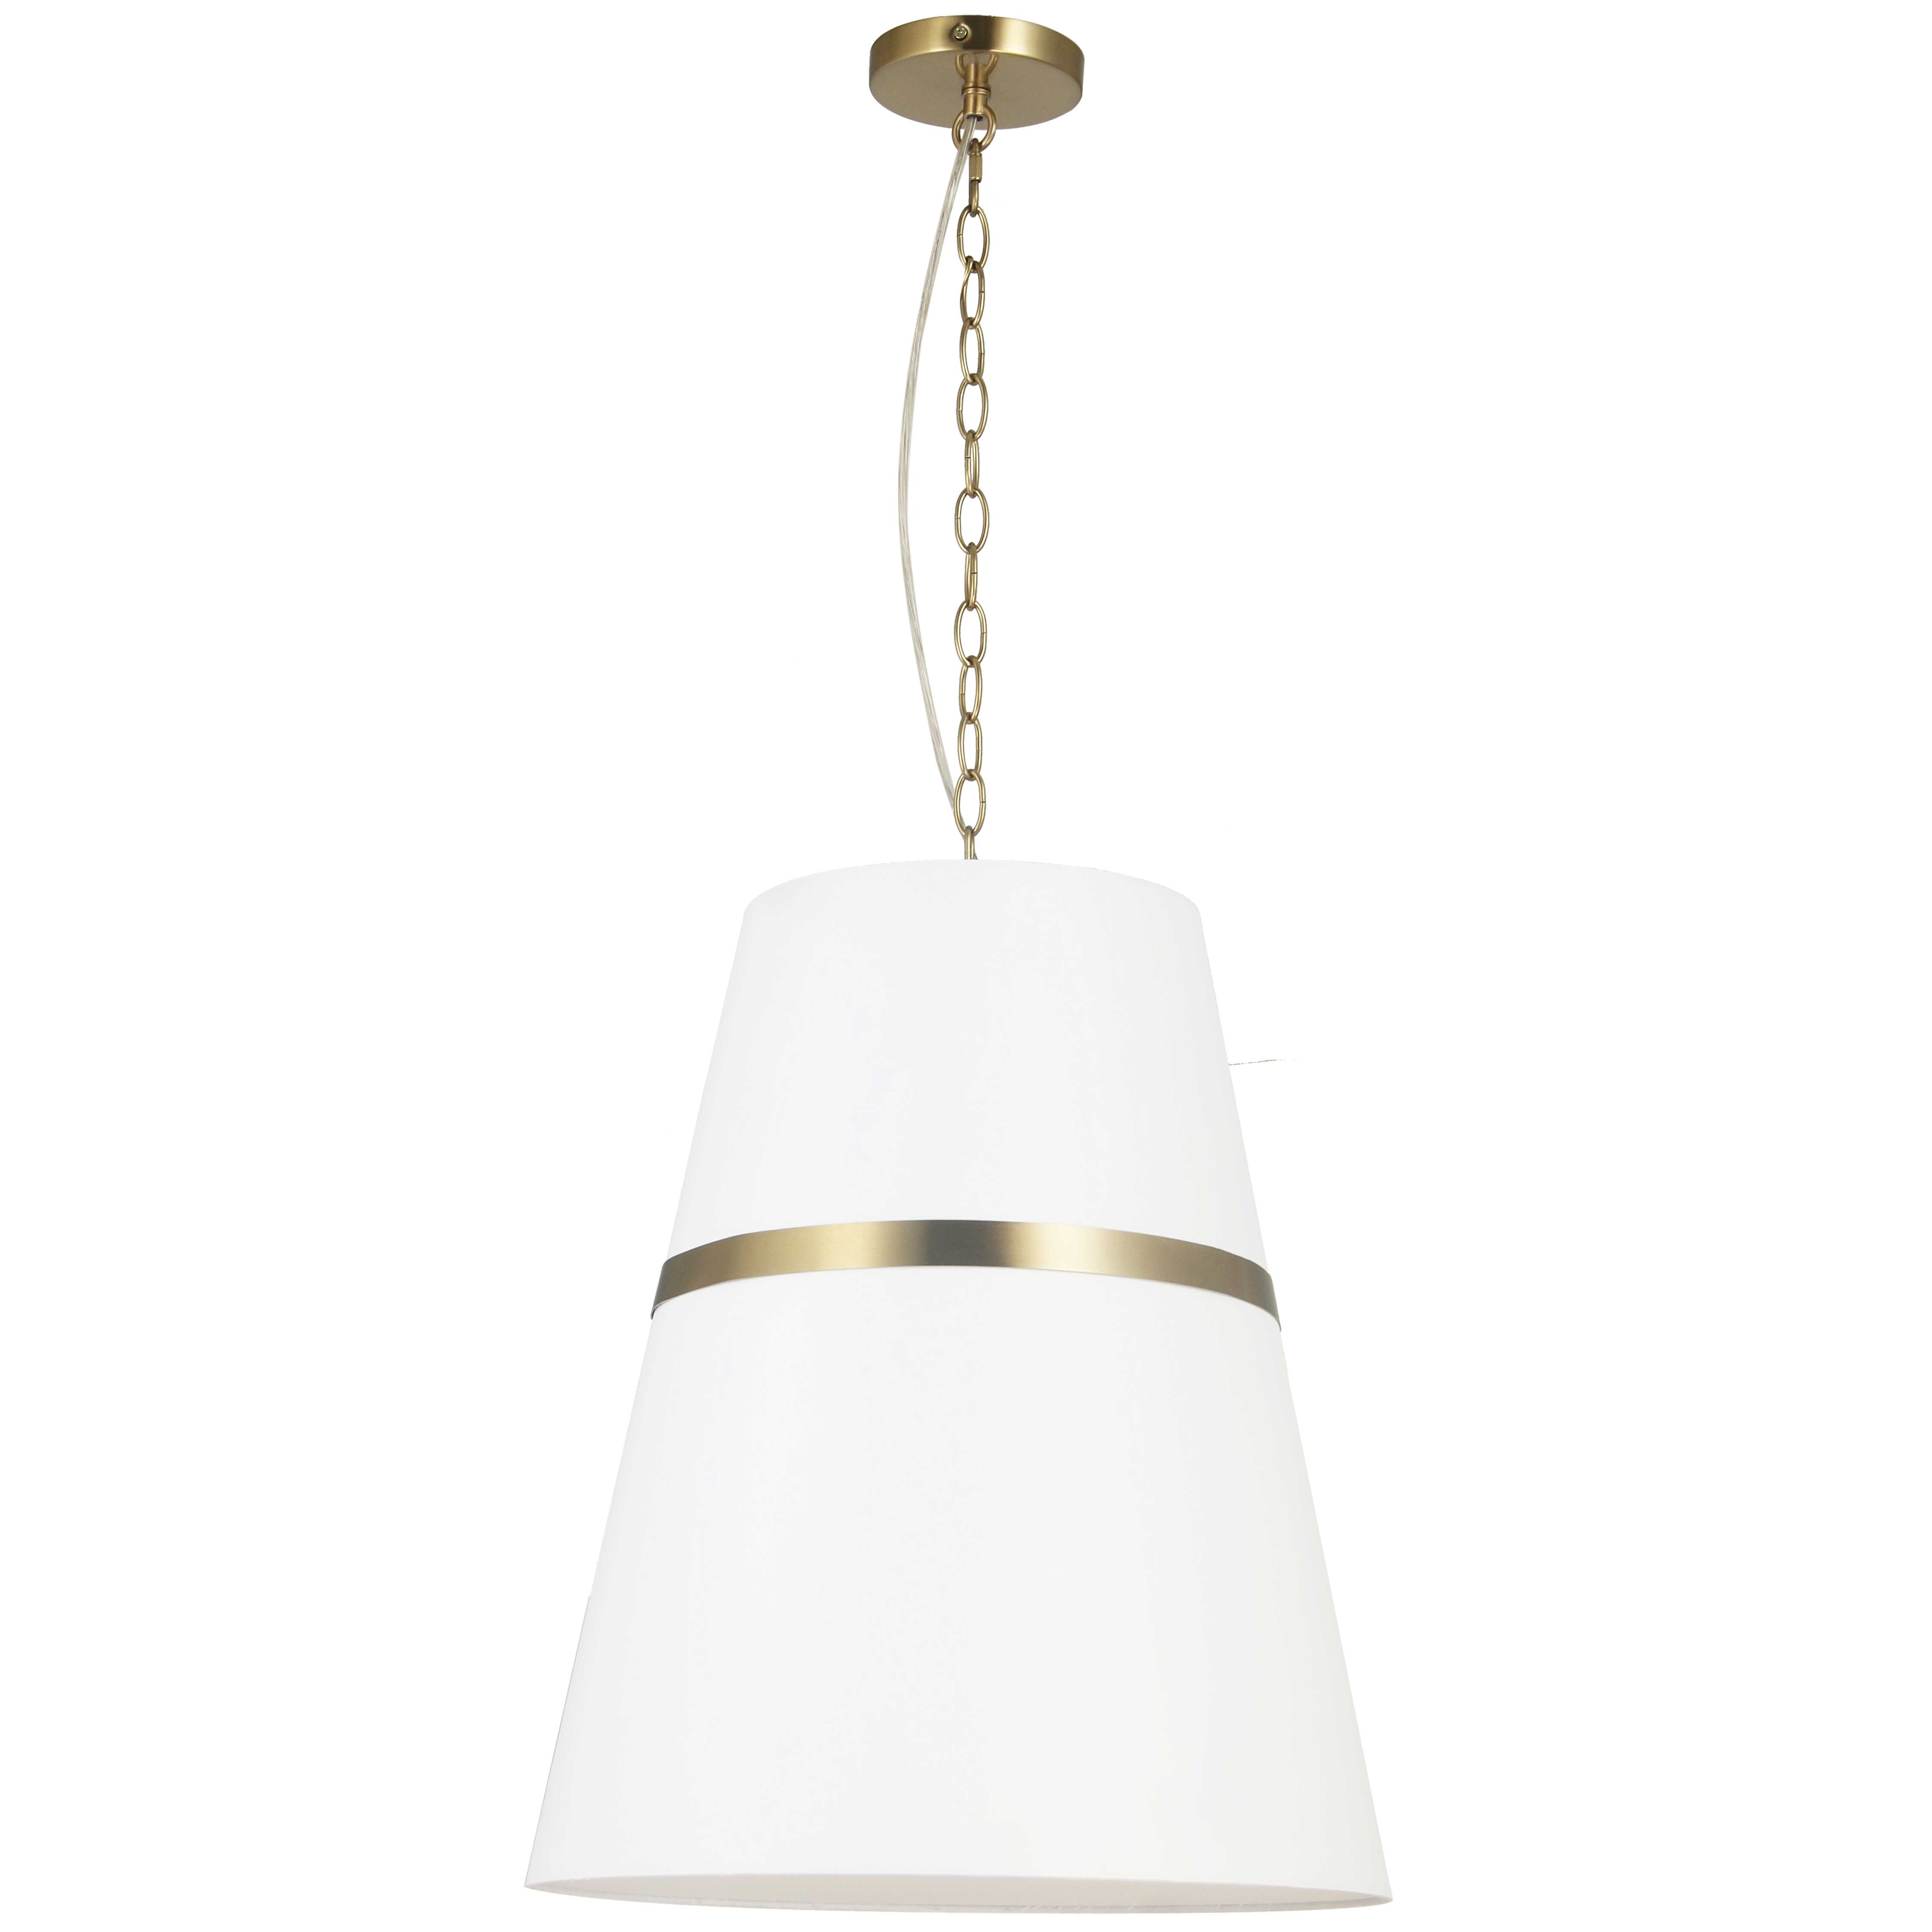 The Symphony family of lighting features a sophistication and sense of style that evokes haute couture. It blends simple shapes and principles into an eye-catching design. The metal chain drop leads to an unobtrusive frame inside a chic white shade in a tapered drum shape. A band of matching metal around the tapered end of the shade creates an eye-catching contrast. Available in pendant or flush configurations, it's a sleek and fashionable look that will draw attention to the furnishing around it in your mid-century to contemporary home.